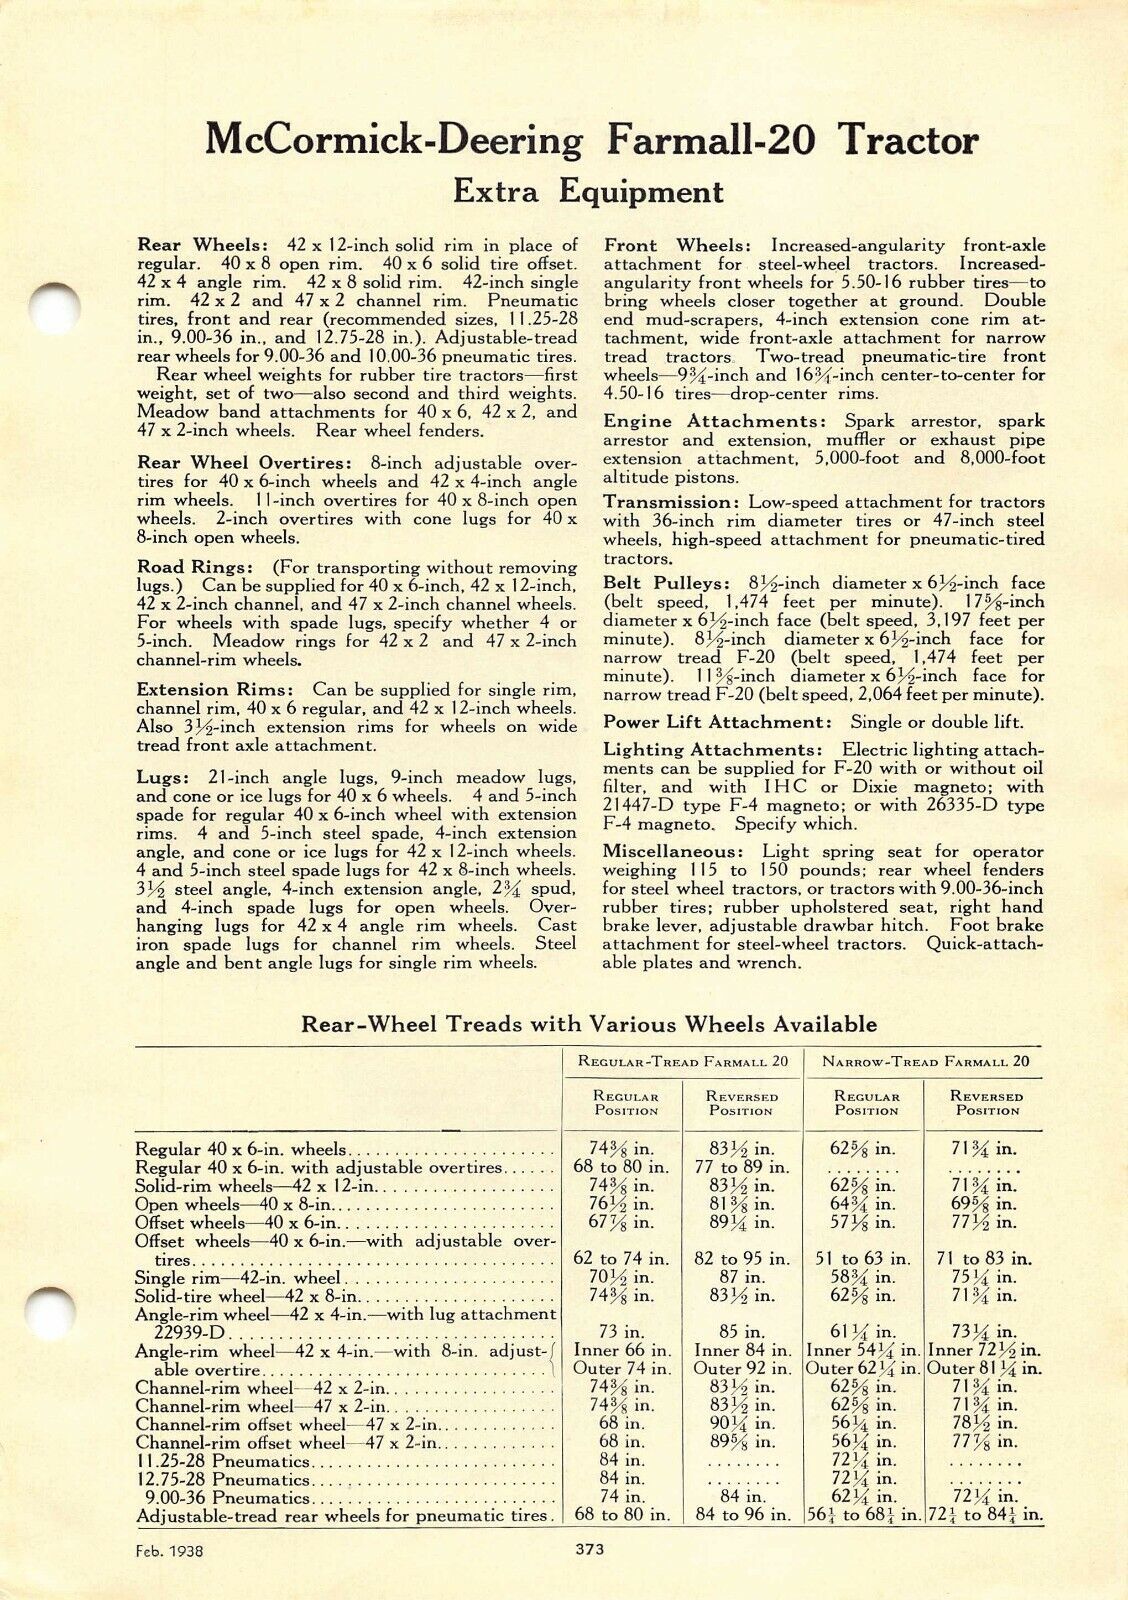 McCormick-Deering Farmall-20 Tractor Extra Equipment Dual Page Ad Spec Sheet - $18.70